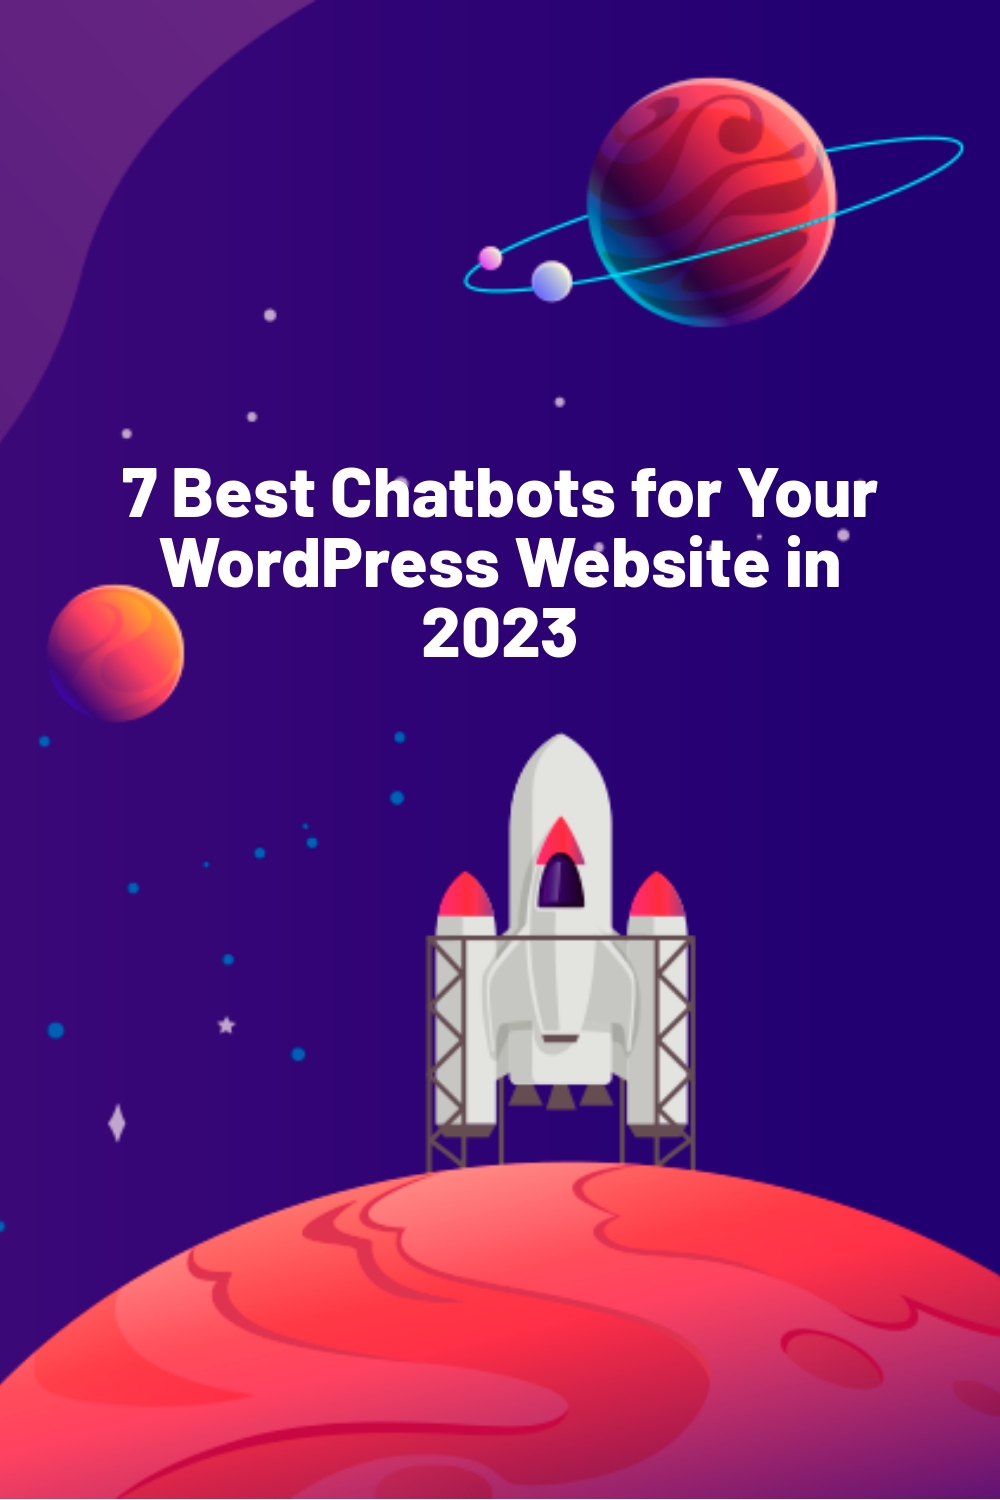 7 Best Chatbots for Your WordPress Website in 2023